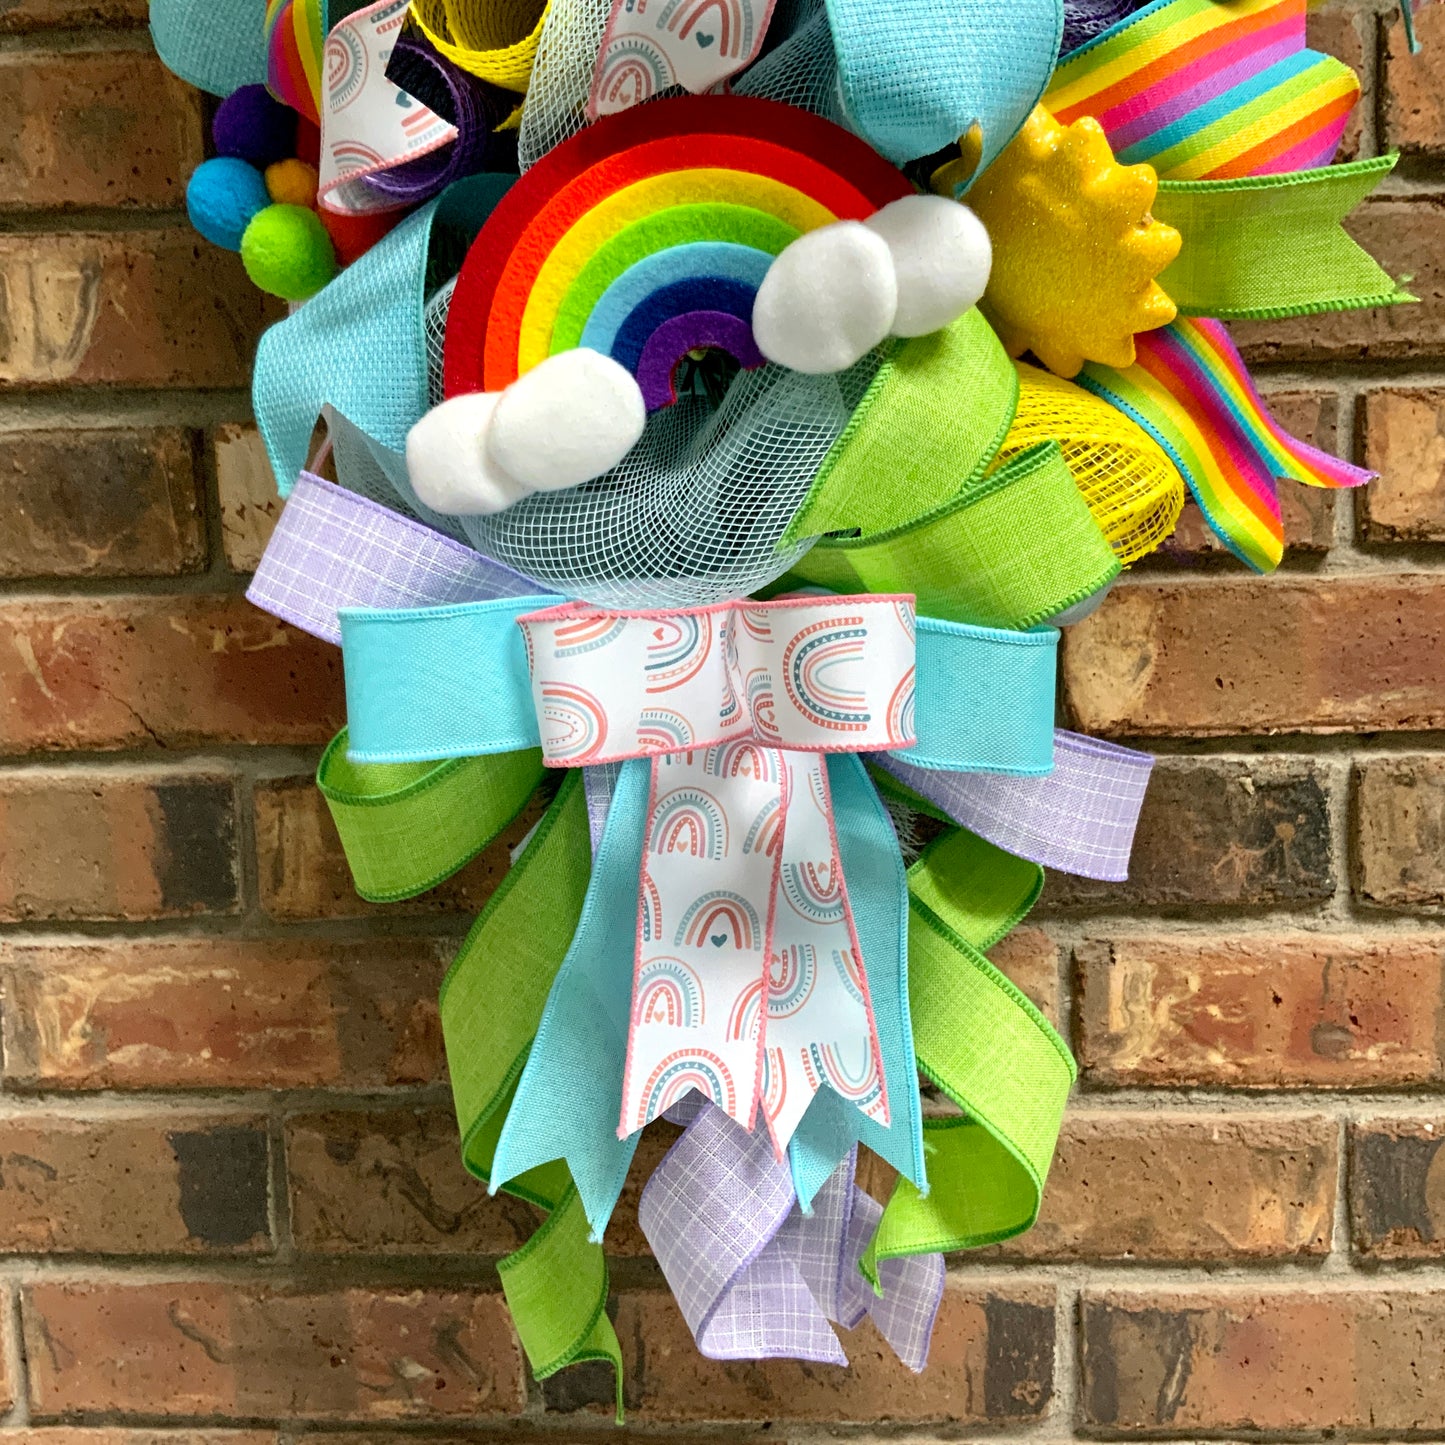 Snoopy Summer Wreath, Snoopy and Woodstock Decor, Summer Snoopy Door Hanger, Snoopy Swag, Colorful Summer Wreath, Rainbow Summer Wreath For Front Door